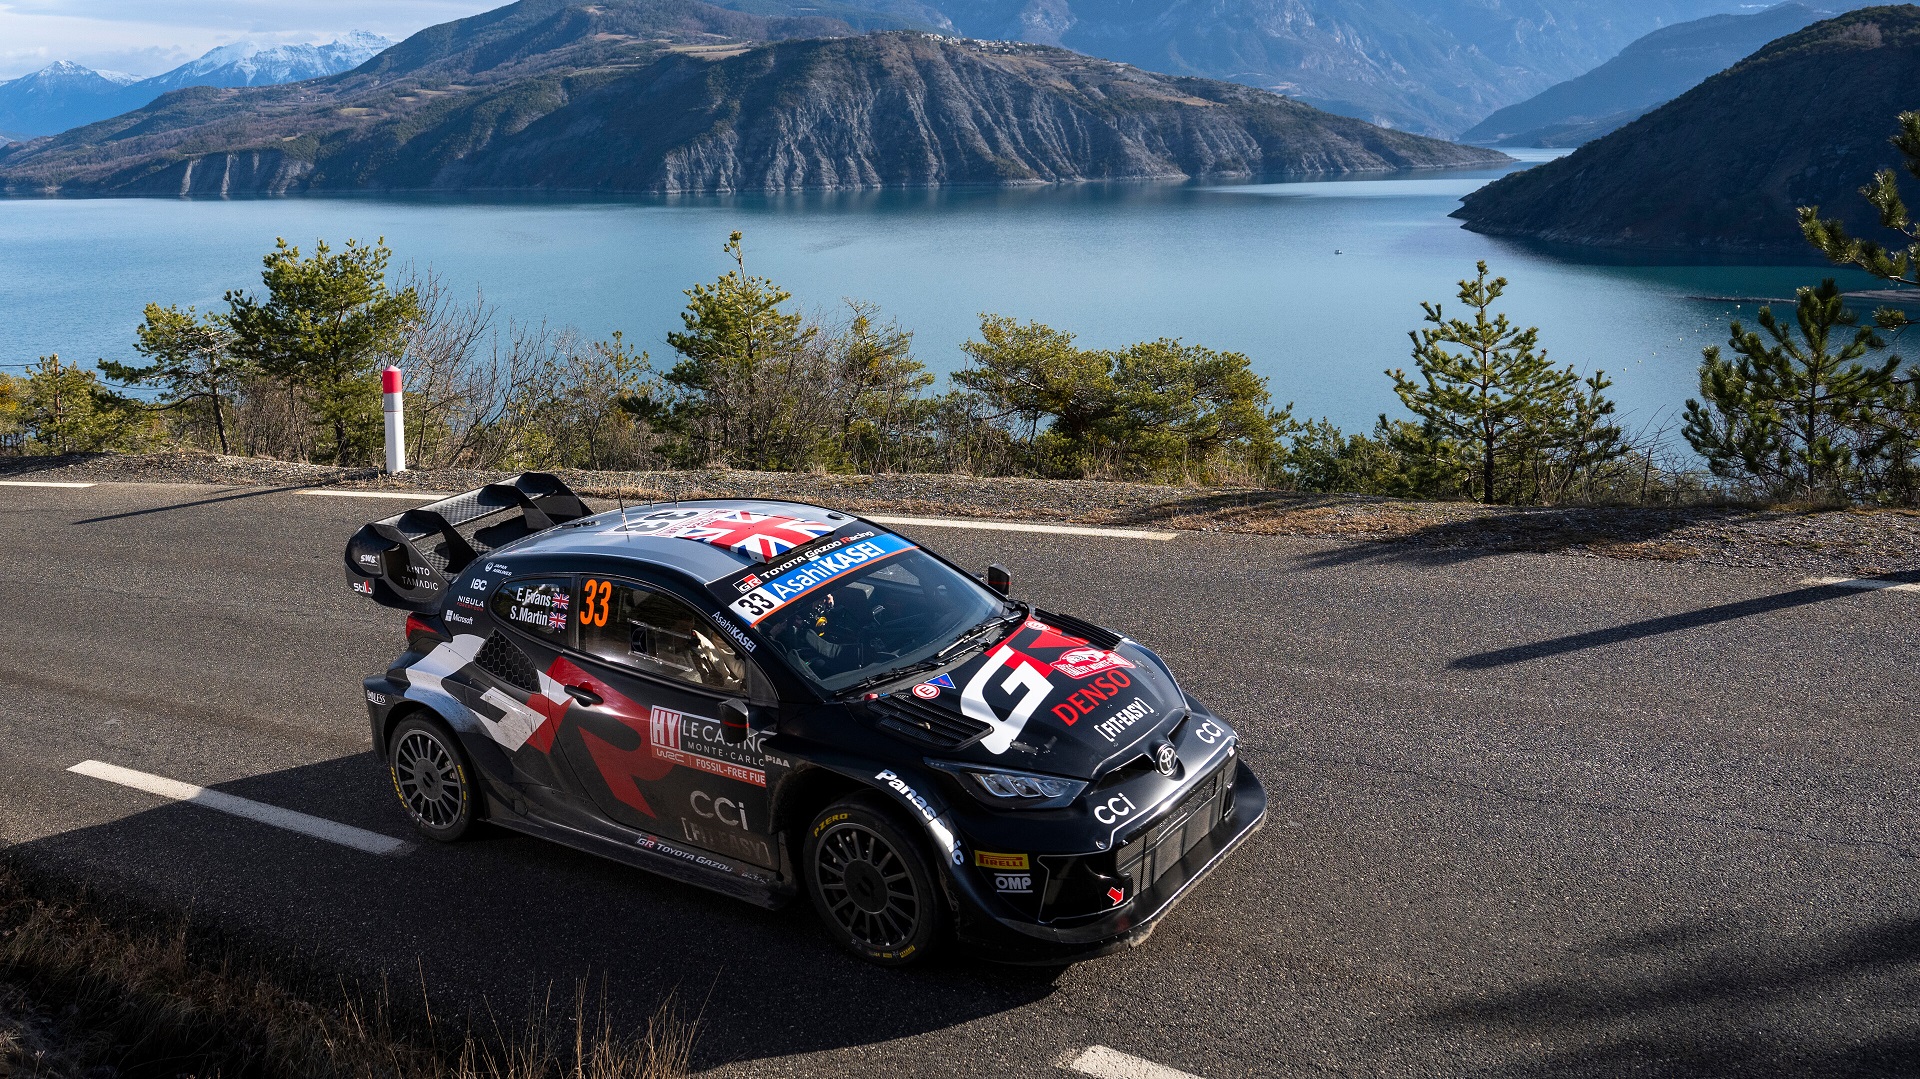 Elfyn Evans (GB) Scott Martin (GB) Of team TOYOTA GAZOO RACING WRT are seen on roadsection during the World Rally Championship Monte-Carlo in Gap, France on 26.January.2024 // Jaanus Ree / Red Bull Content Pool // SI202401260426 // Usage for editorial use only //